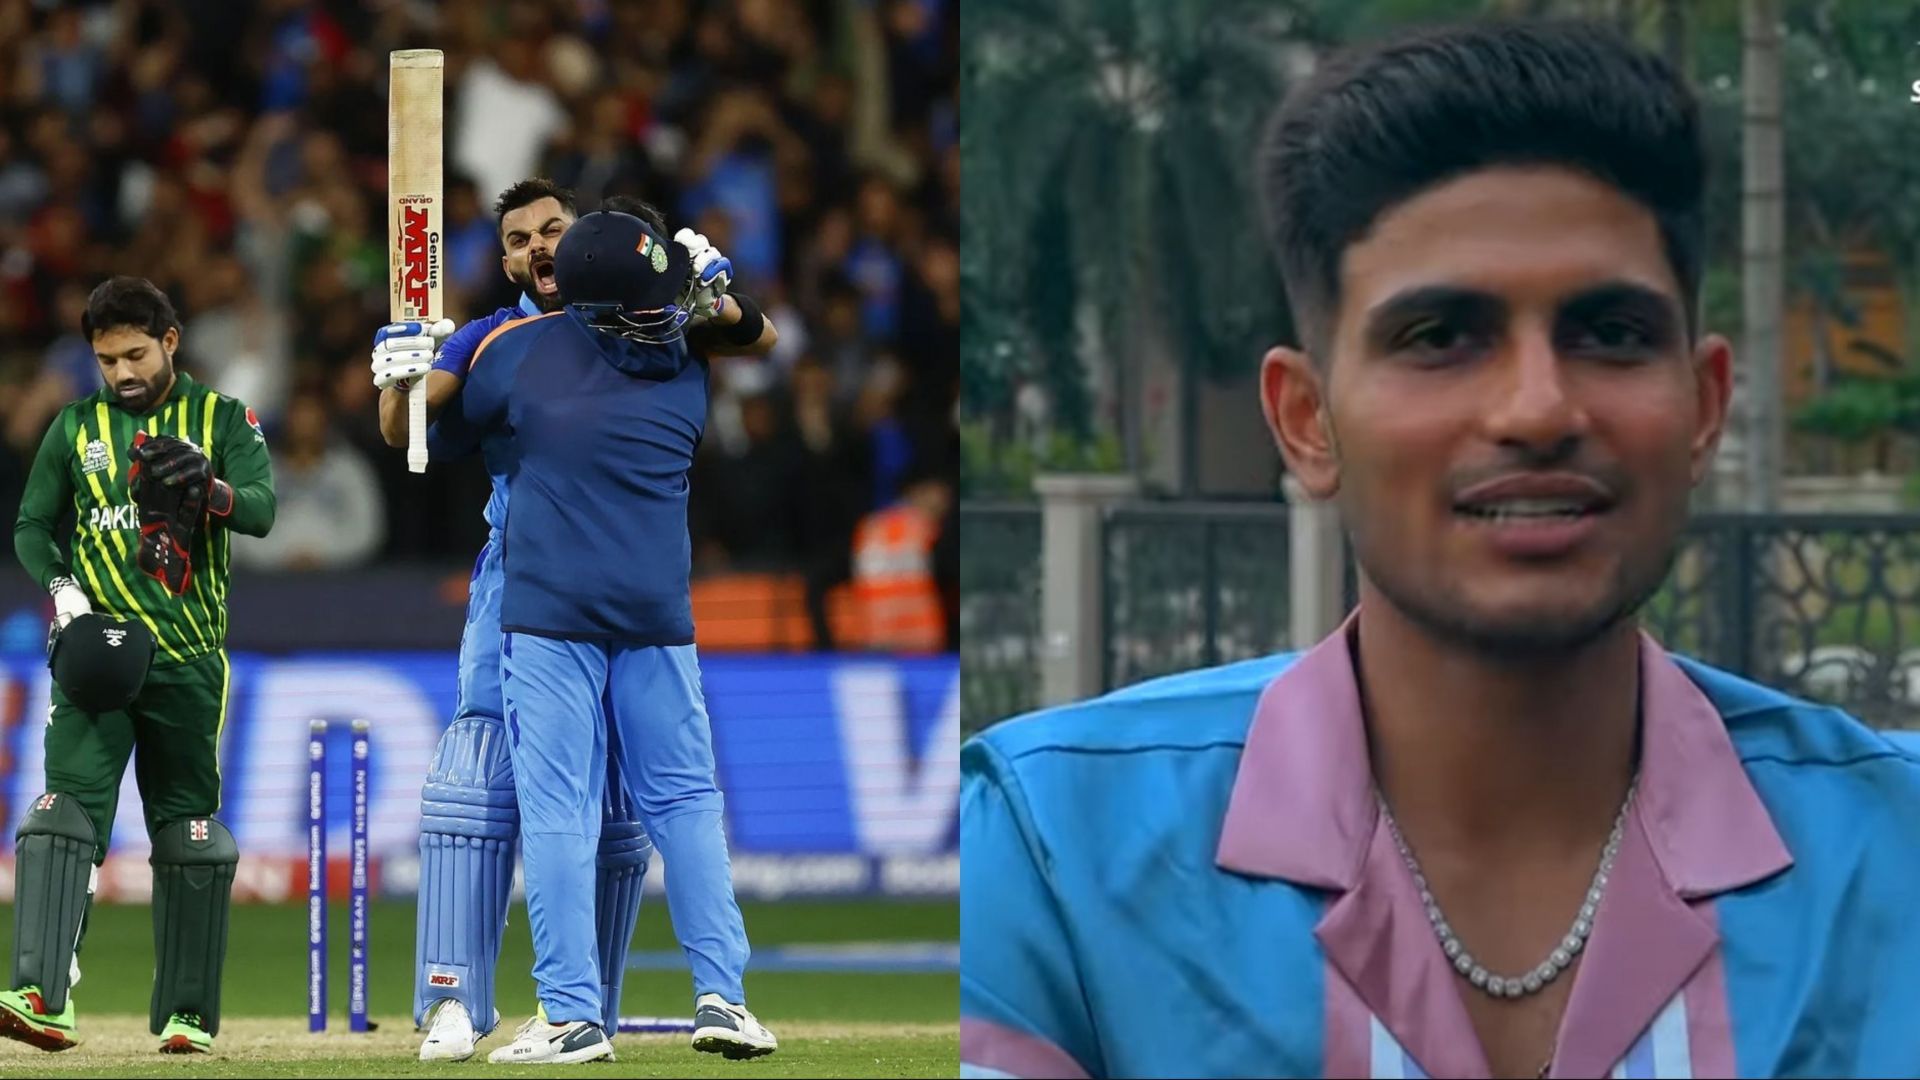 Shubman Gill shared how the Punjab team celebrated India